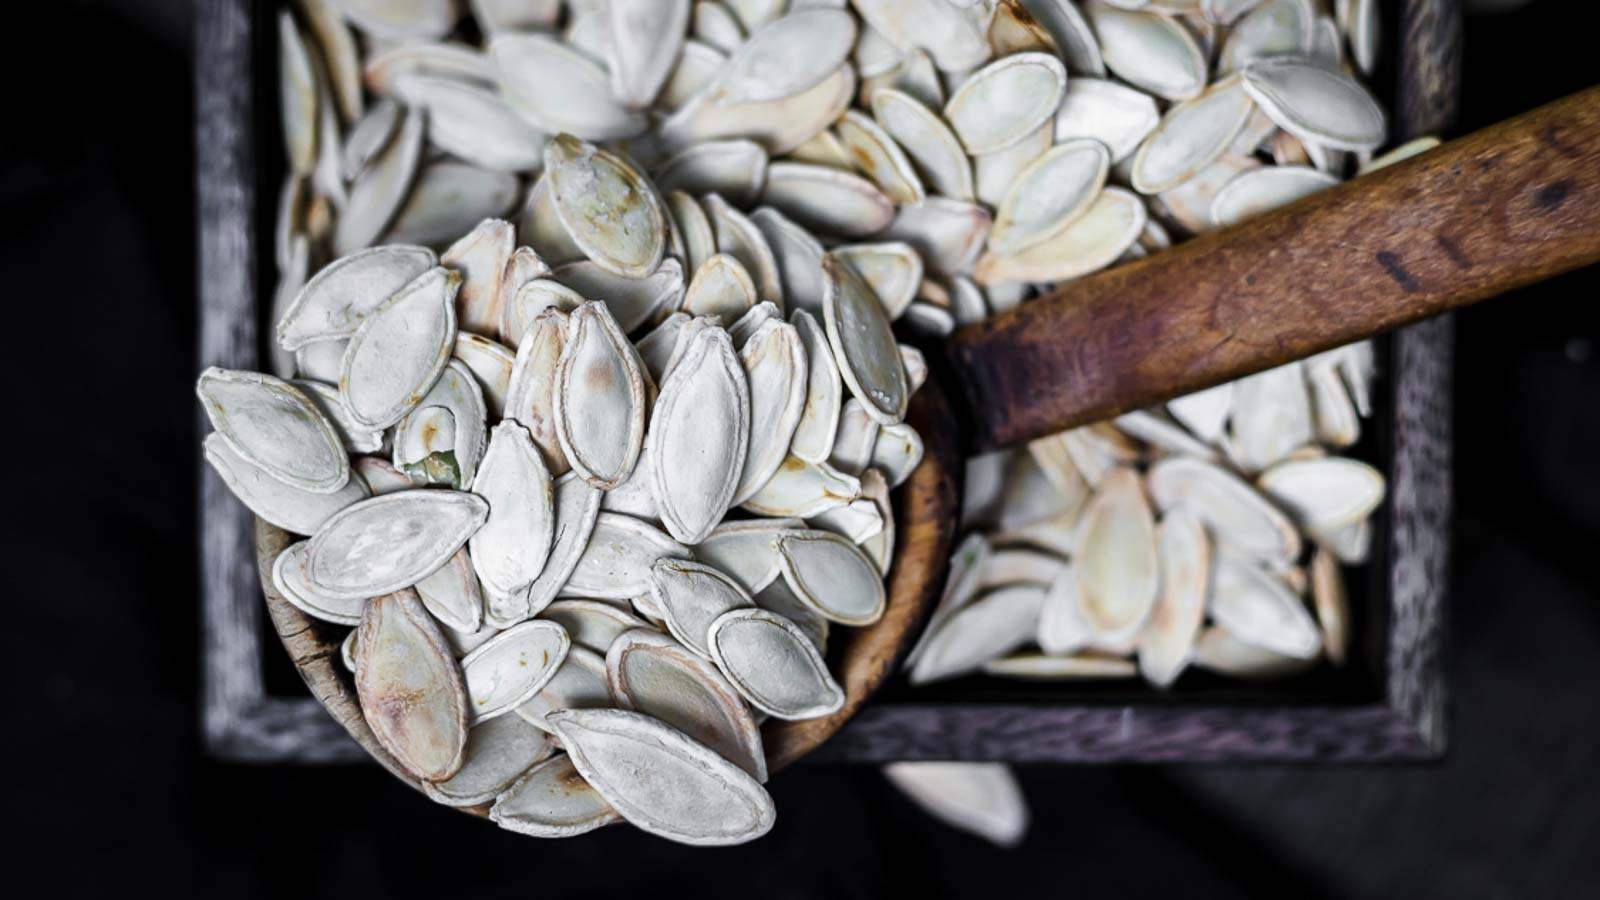 <p>Learn How To Make Quick and Easy Oven Baked Pumpkin Seeds or Roasted Pepitas to enjoy as a perfect crunchy snack, toppings on your salads, soups, or granola. Making pumpkin seeds and toasted pepitas a delicious keto snack that is fully low carb, grain-free, gluten-free and diabetic friendly has never been easier.<br><strong>Get the Recipe: </strong><a href="https://www.lowcarb-nocarb.com/easy-roasted-pumpkin-seeds-pepitas/?utm_source=msn&utm_medium=page&utm_campaign=msn">Oven Baked Pumpkin Seeds or Roasted Pepitas</a></p>